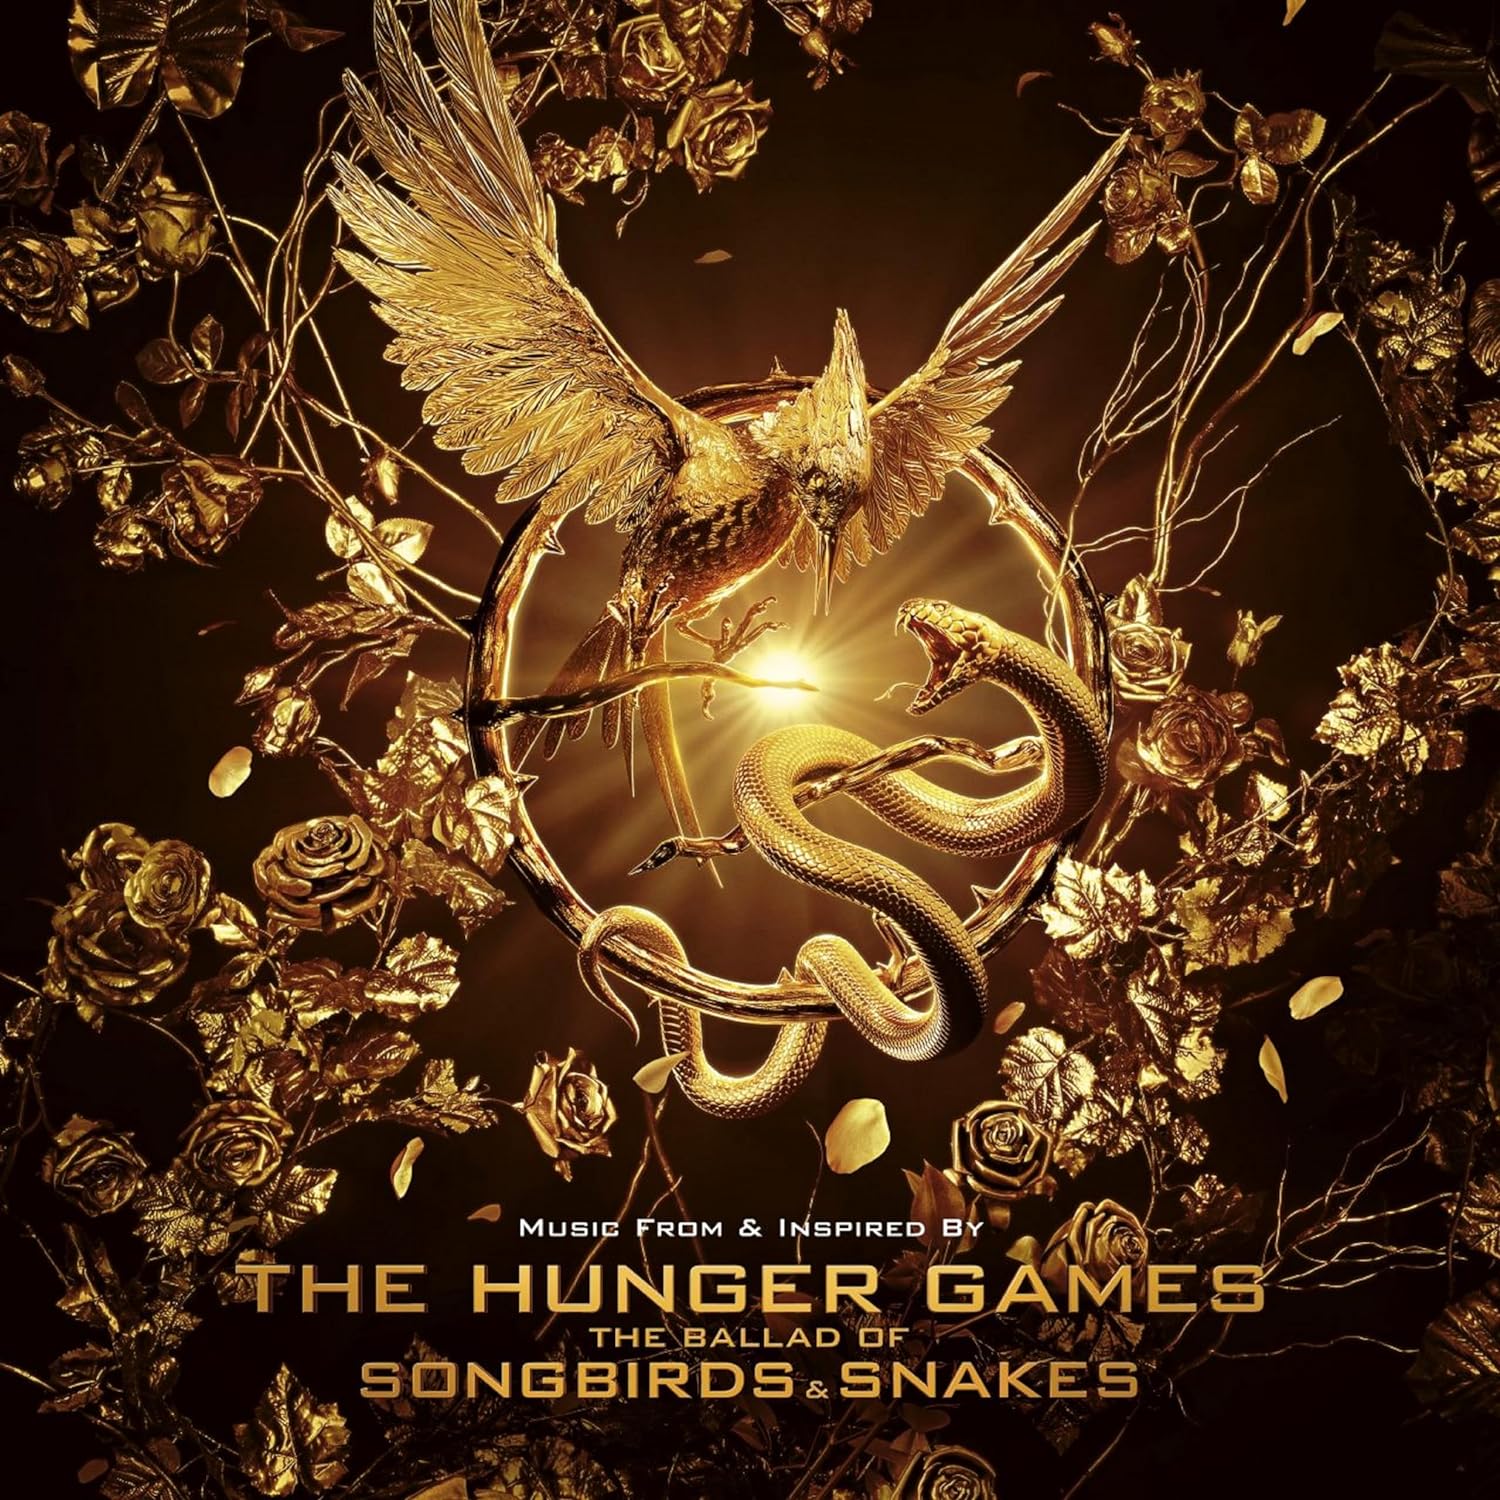 Various Hunger Games, Ballad Of Songbirds And Snakes